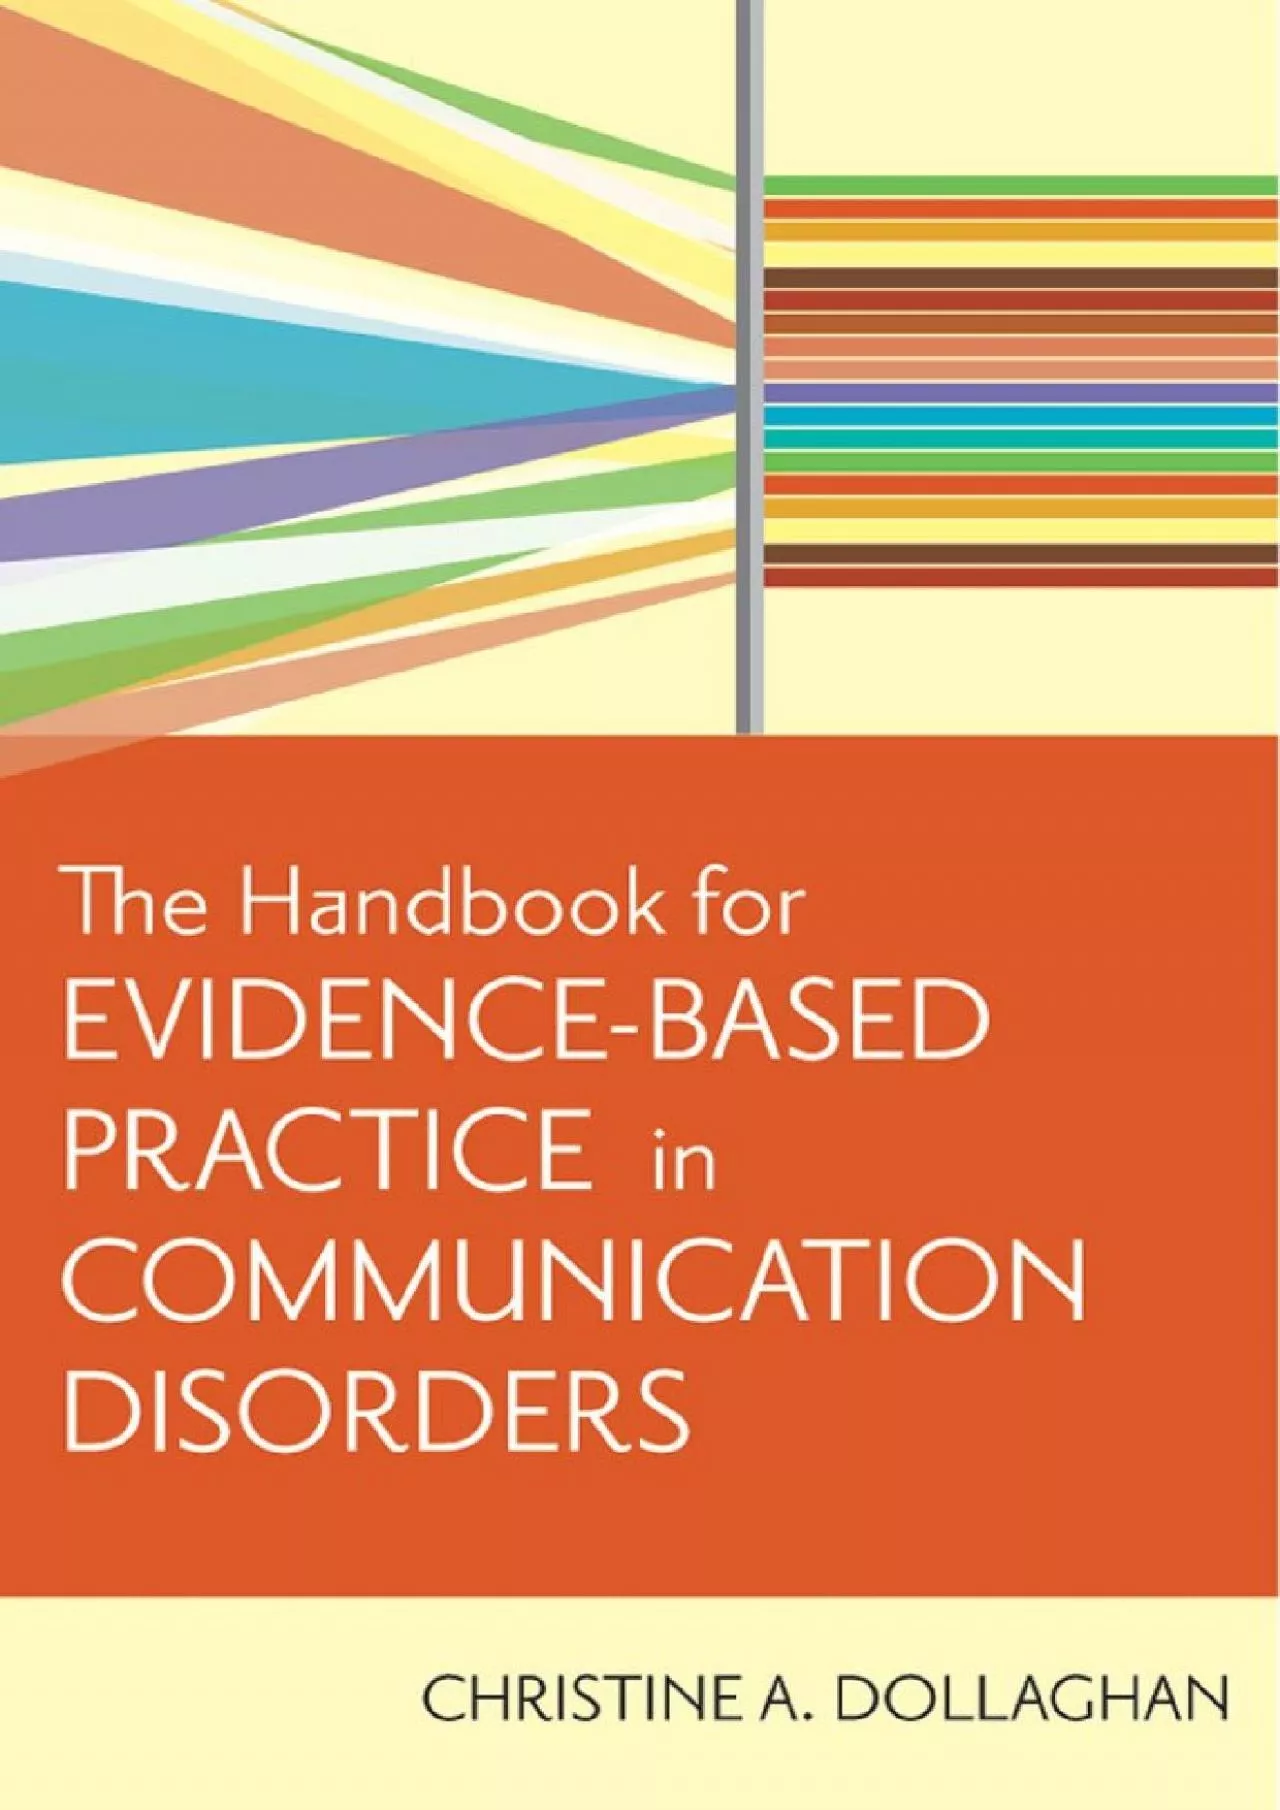 (DOWNLOAD)-The Handbook for Evidence-Based Practice in Communication Disorders